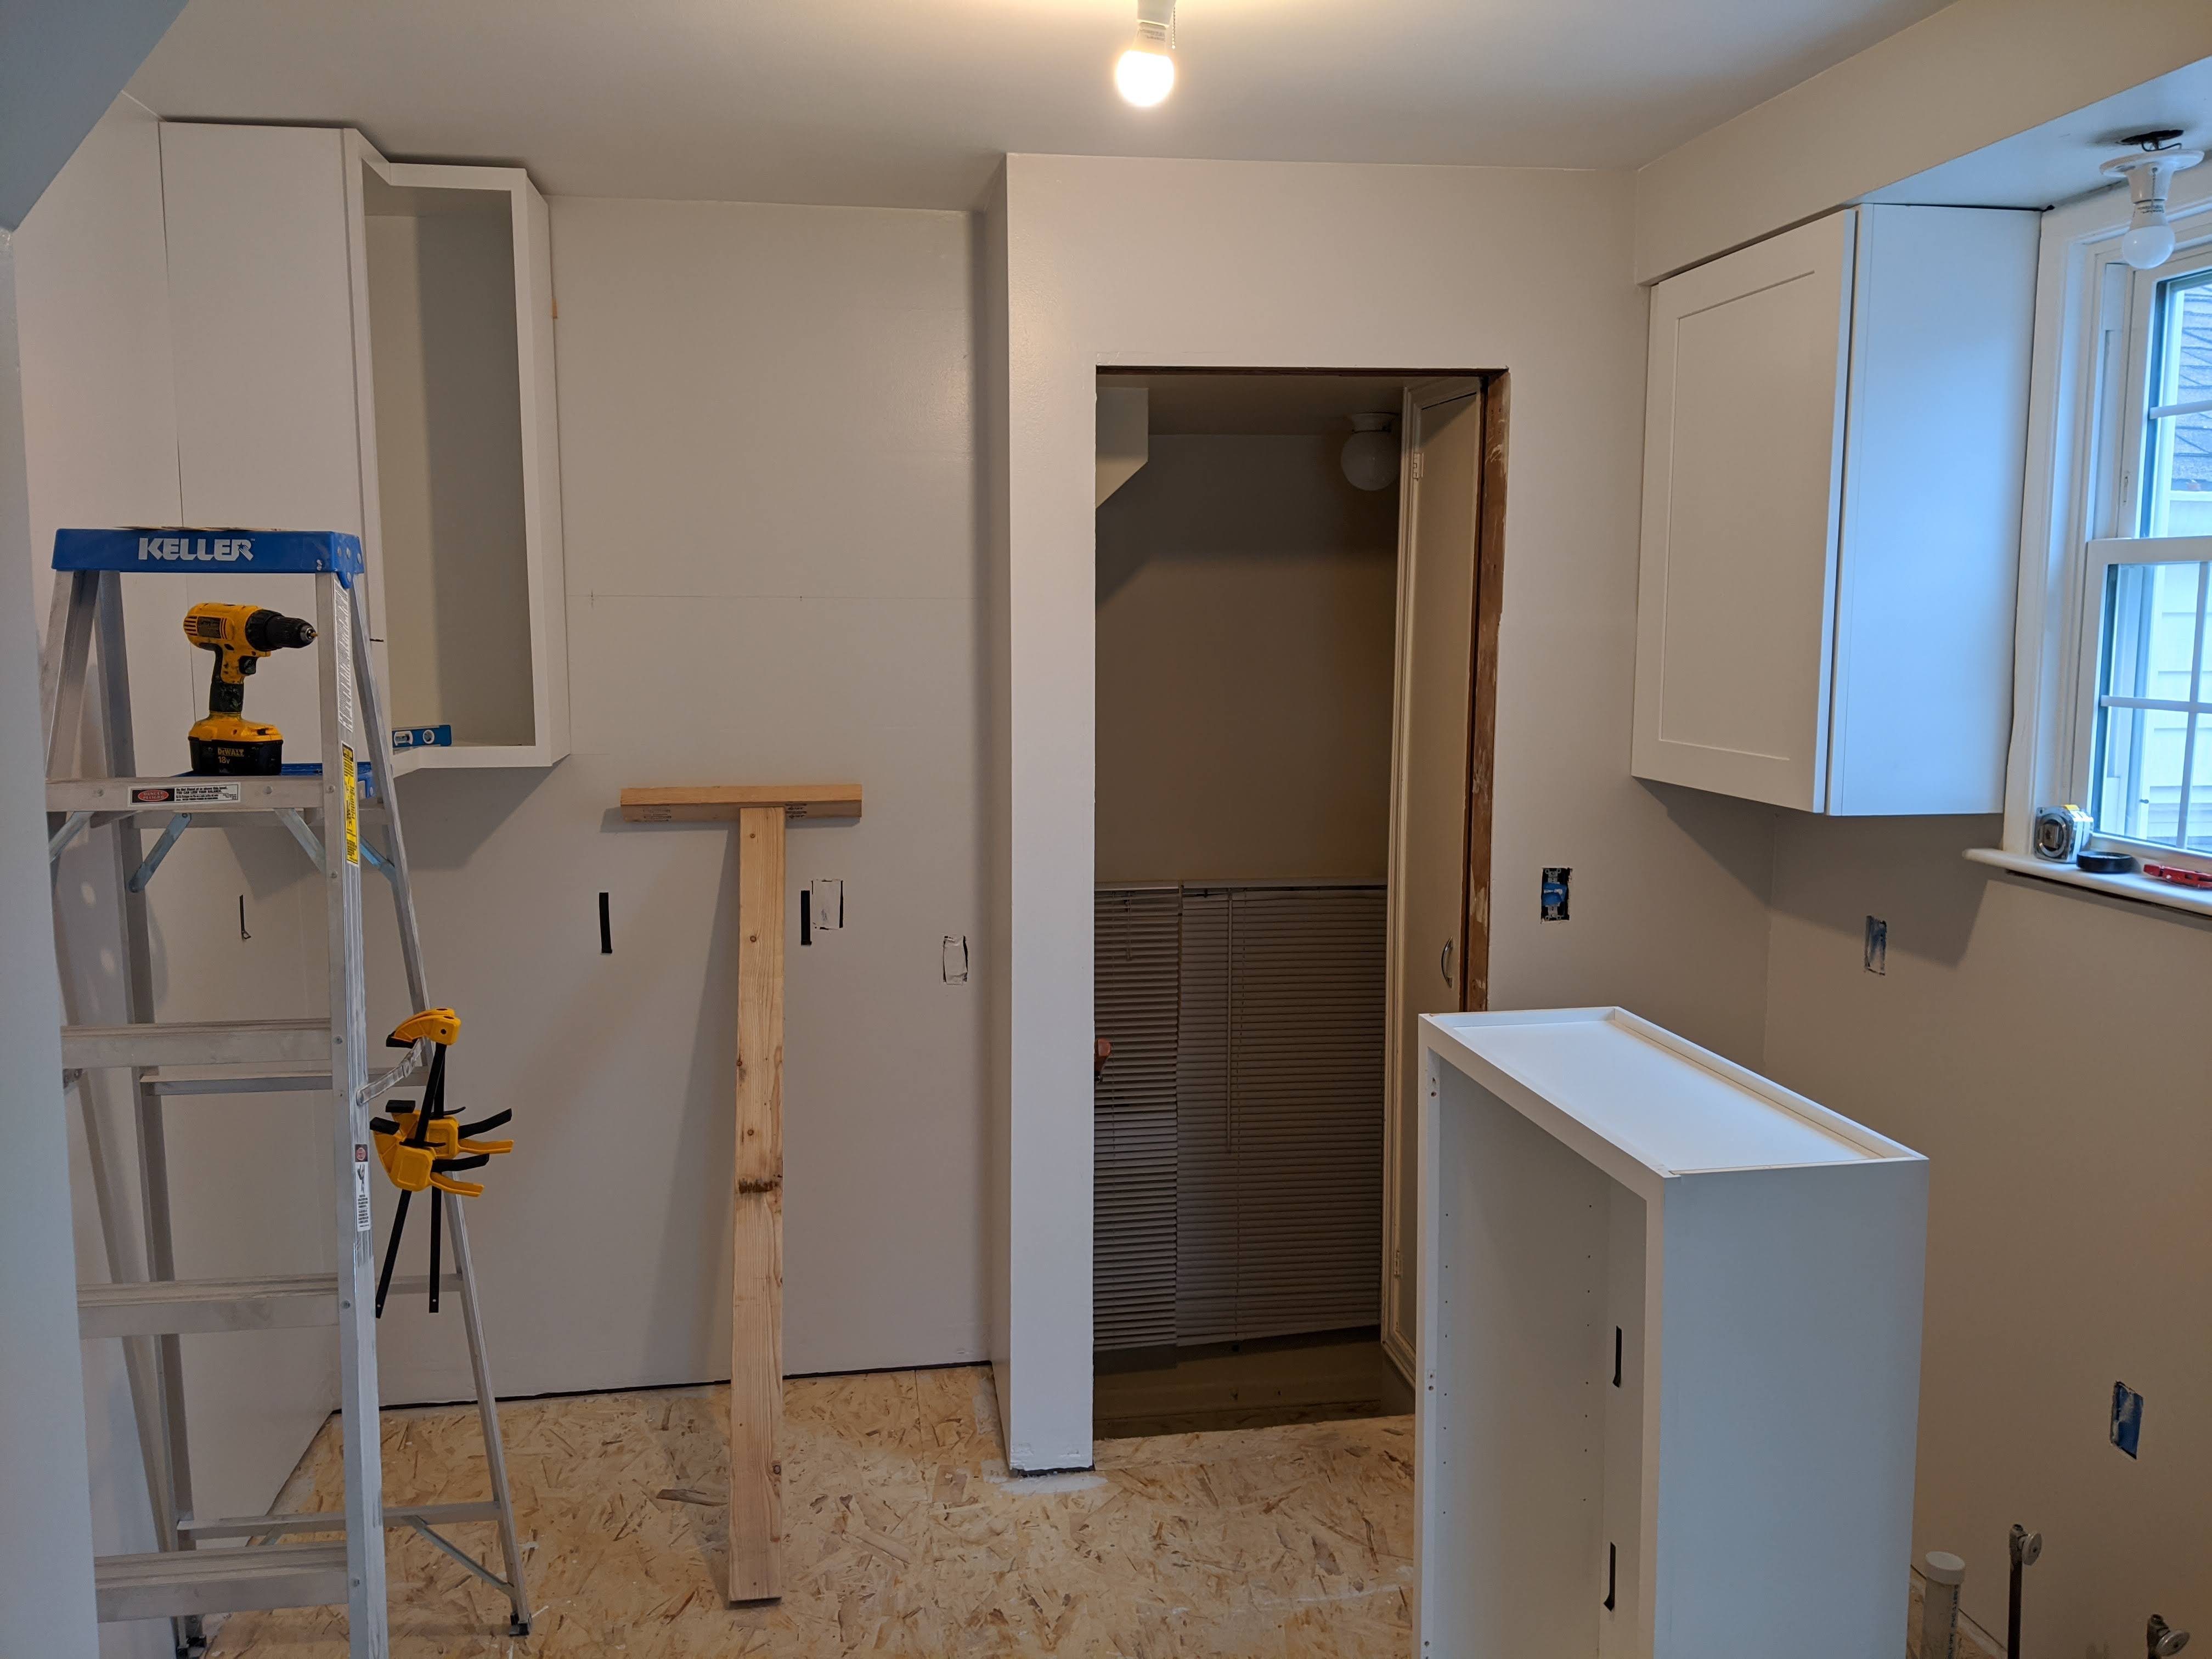 A kitchen in construction, handing top cabinets